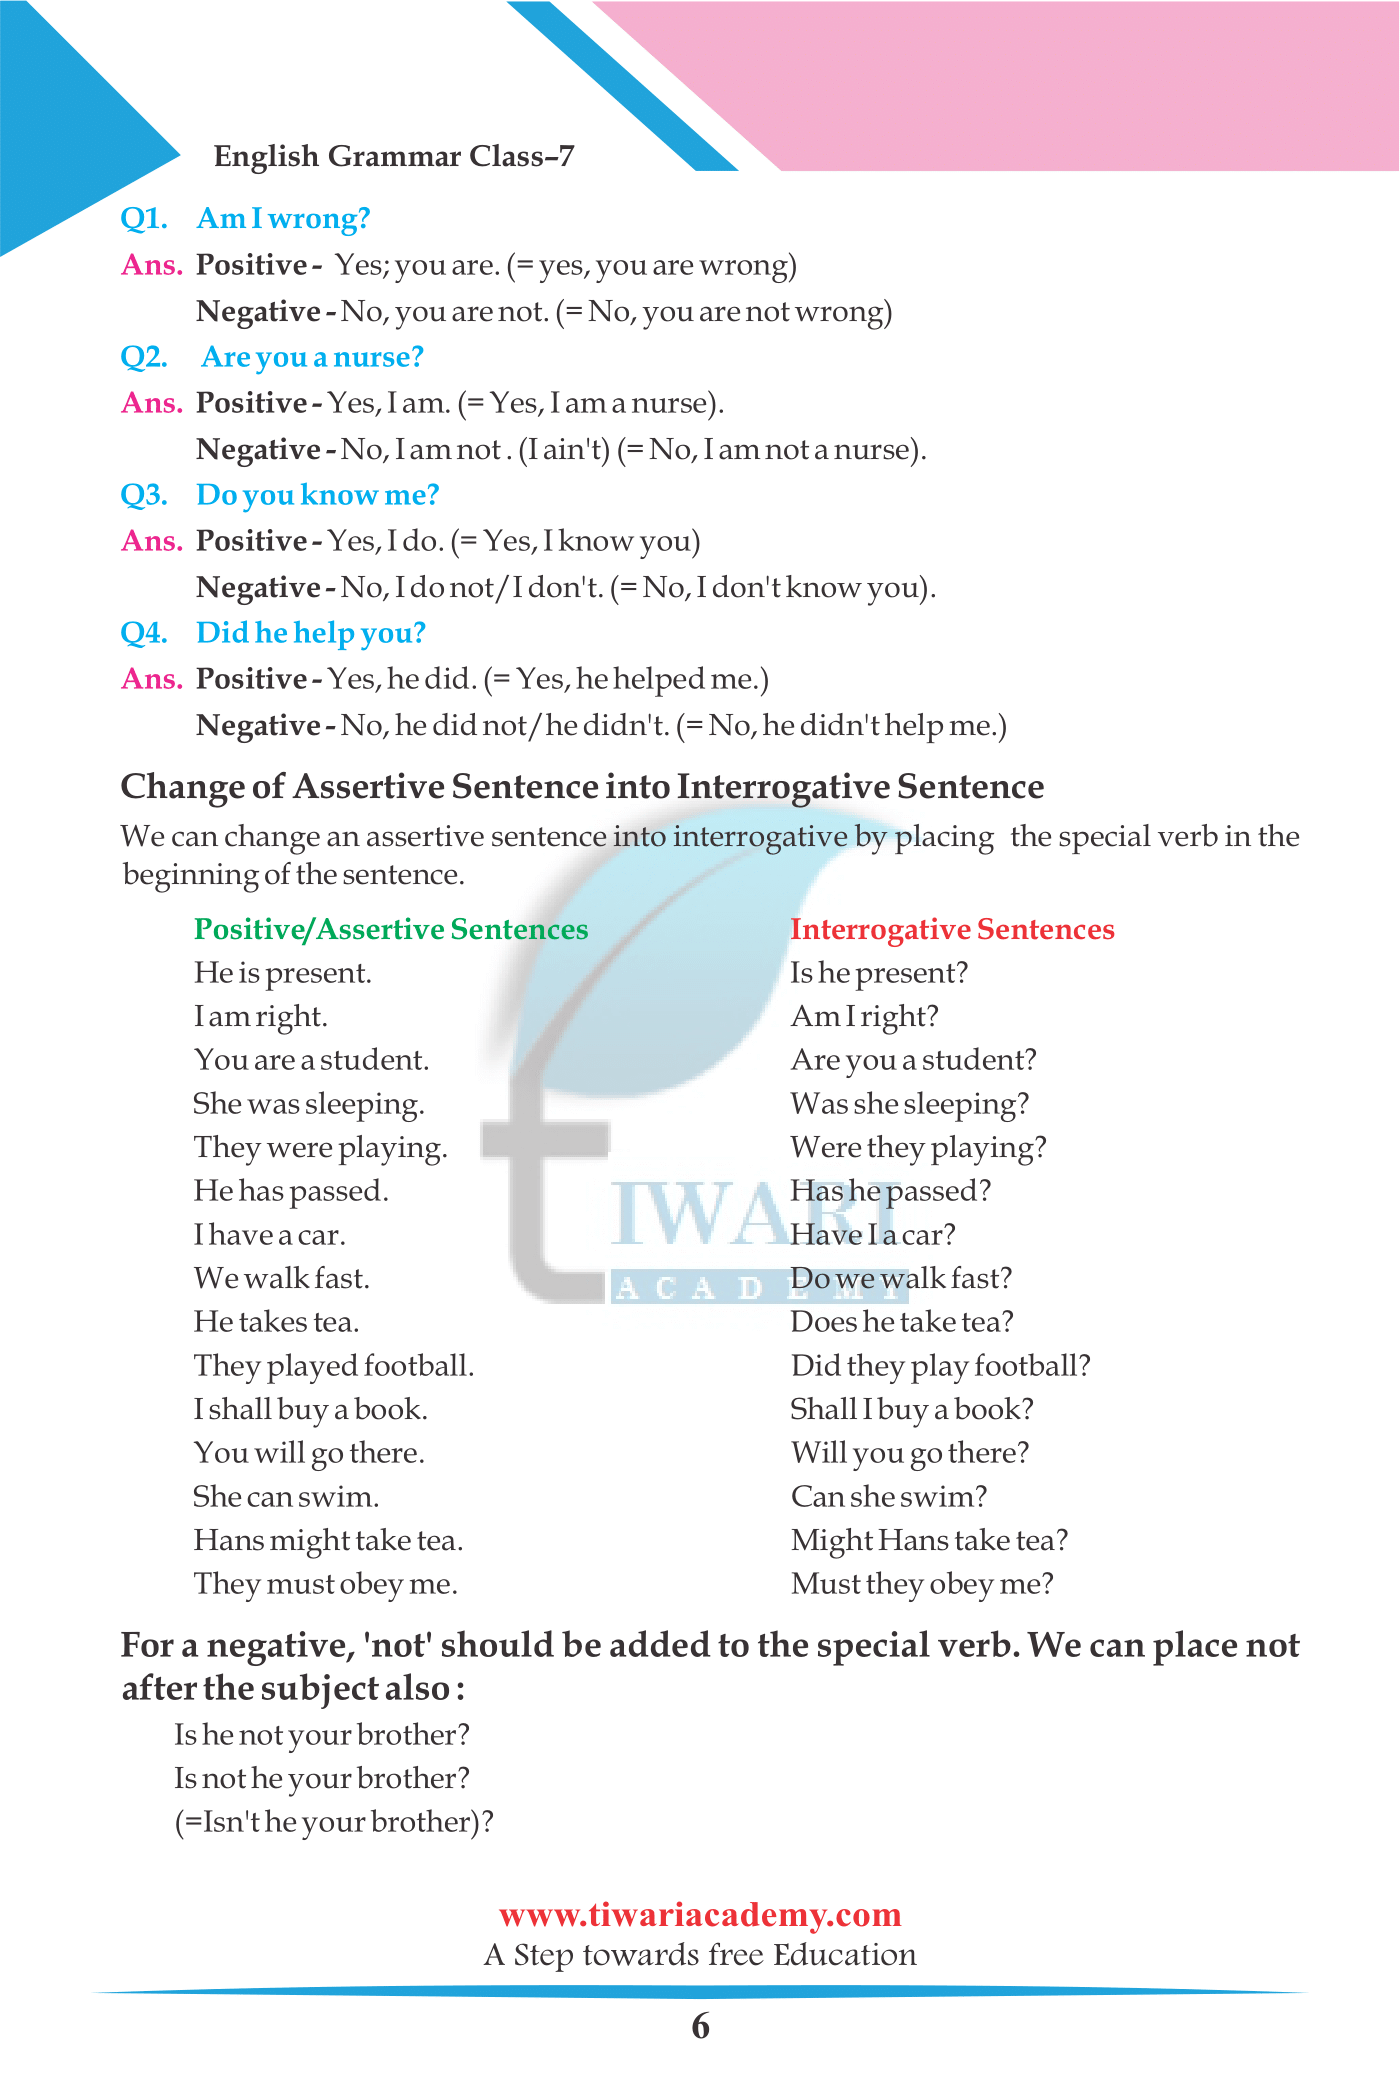 NCERT Solutions for Class 7 English Grammar chpater 1